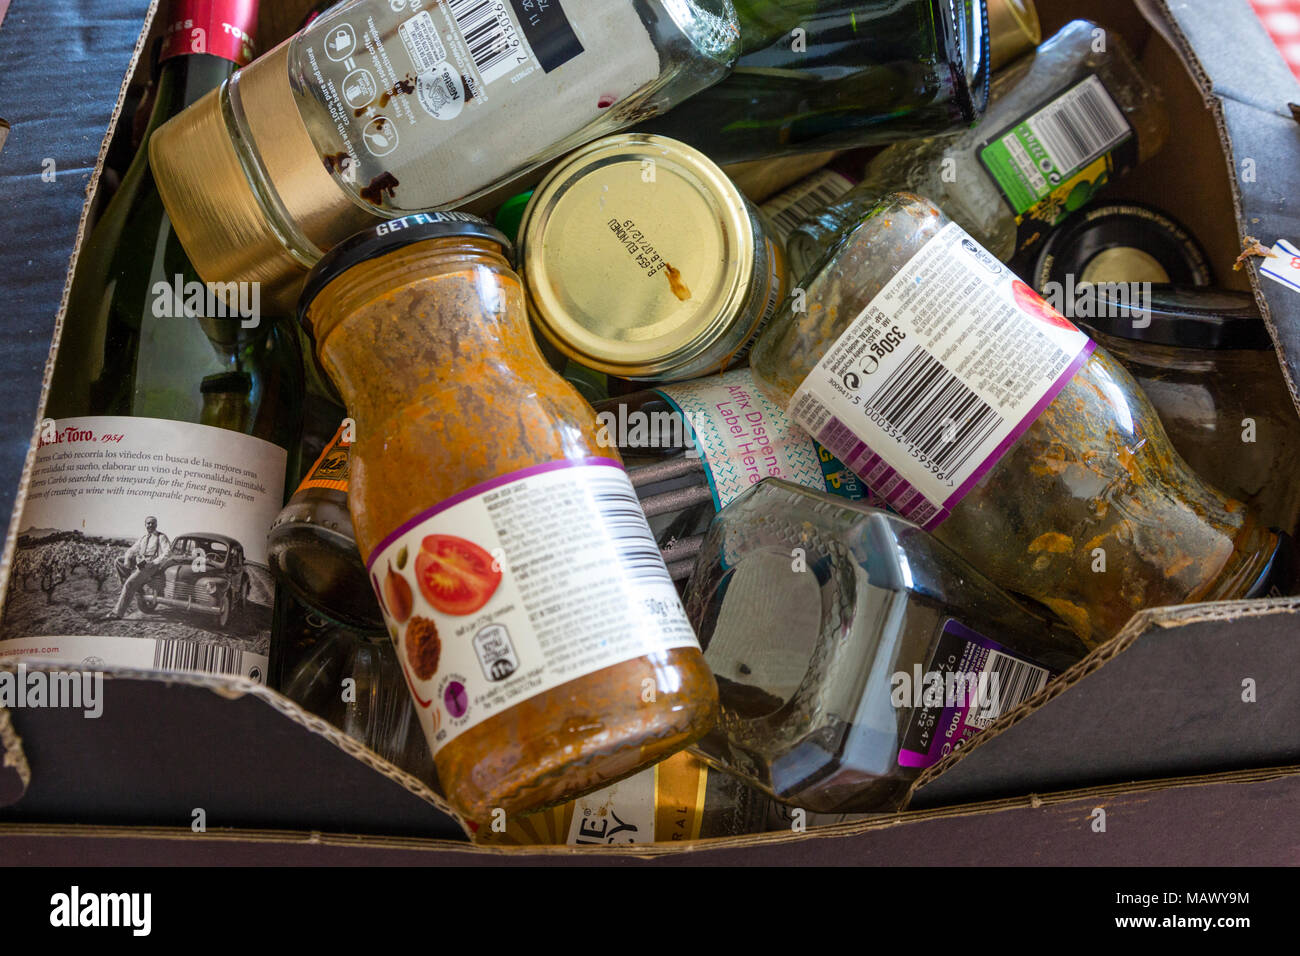 Cardboard box with glass bottles and jars for recycling Stock Photo